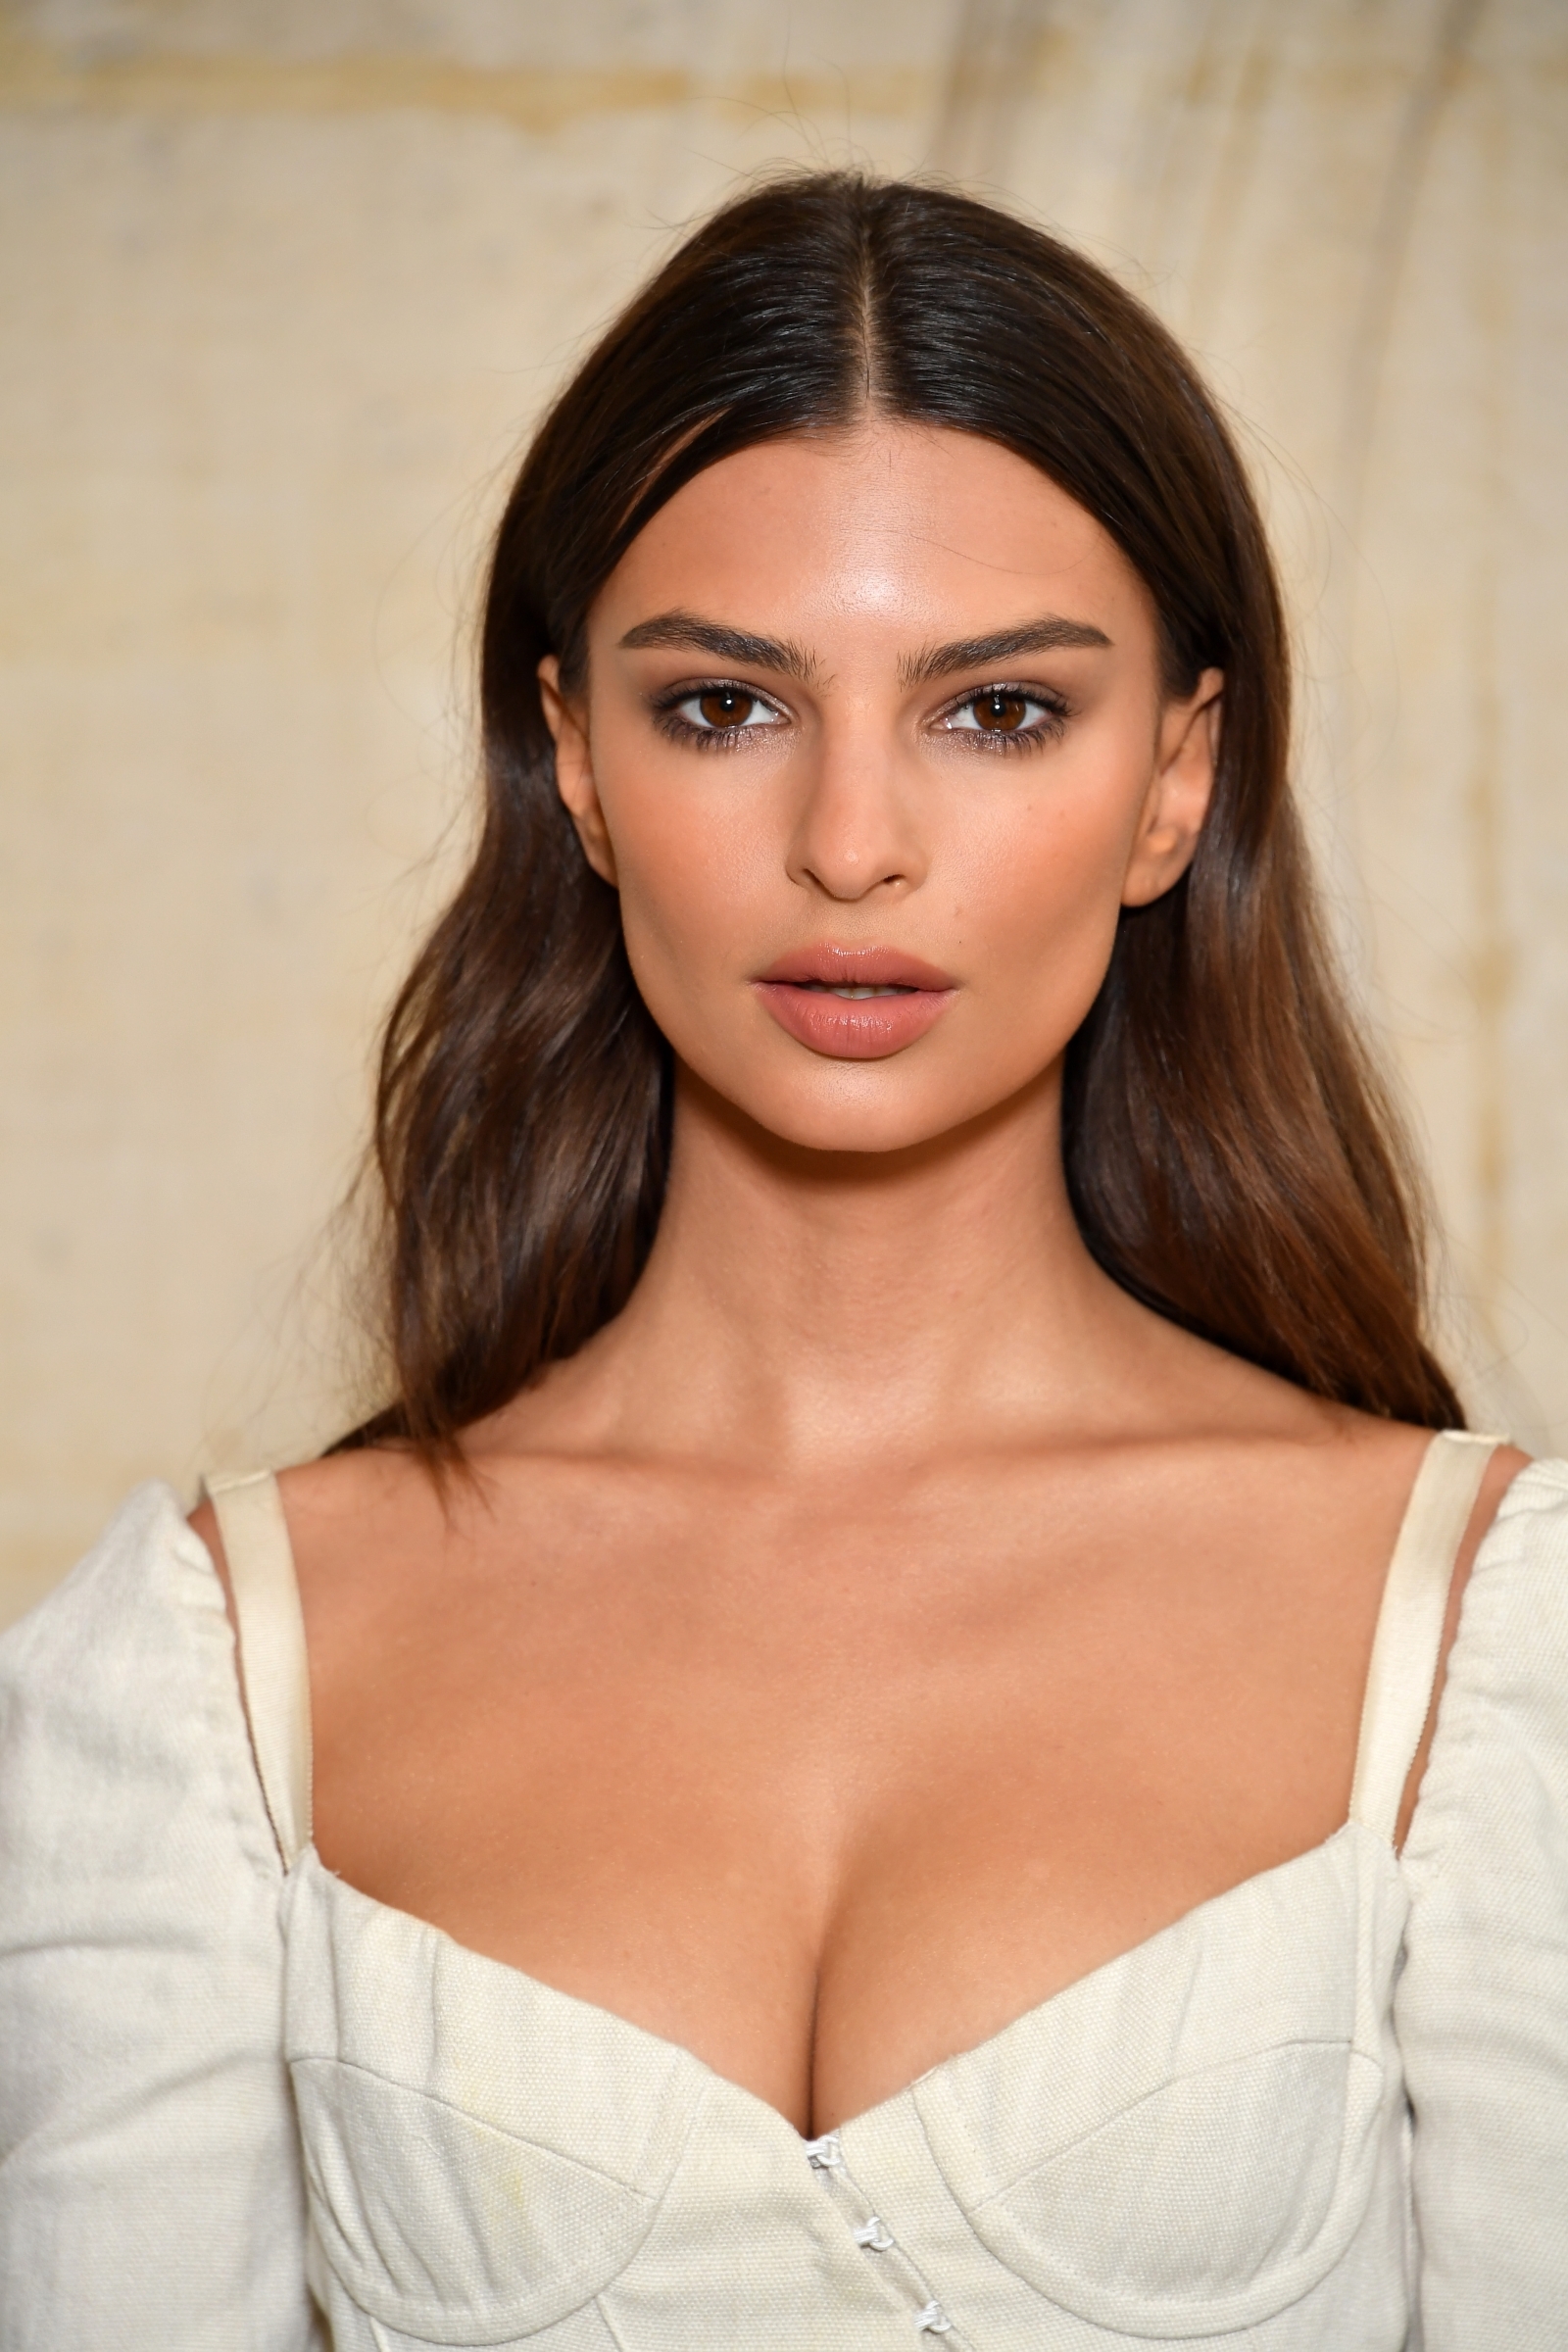 Emily Ratajkowski leaves little to the imagination with stunning new